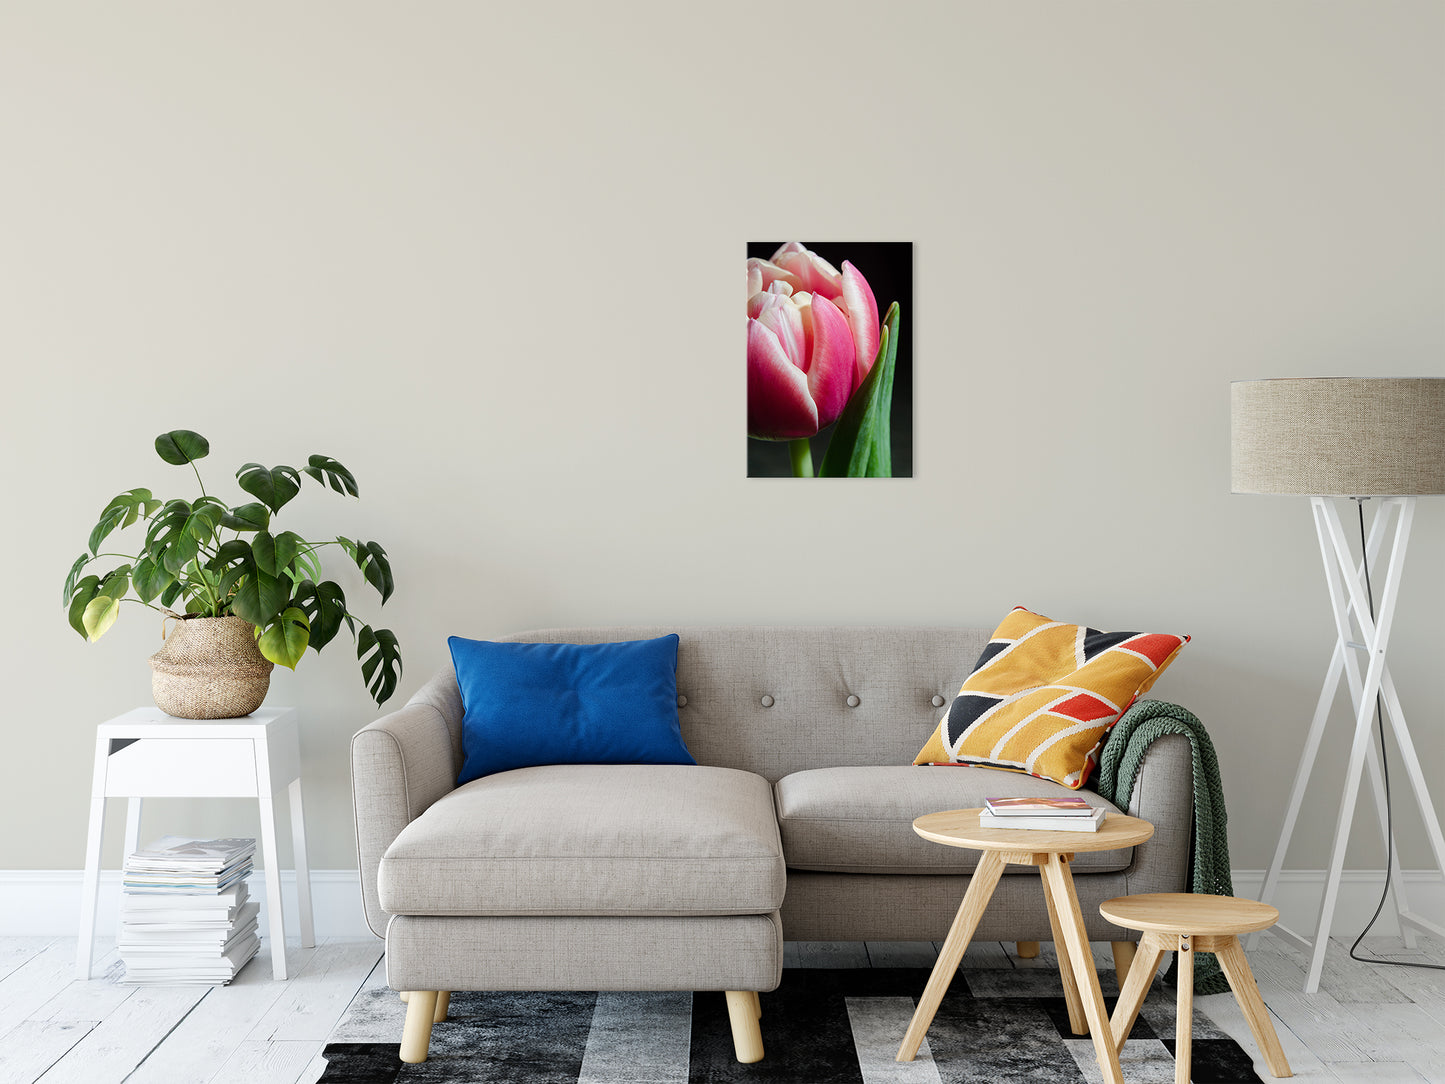 Pink and White Tulip Nature / Floral Photo Fine Art Canvas Wall Art Prints 16" x 20" - PIPAFINEART